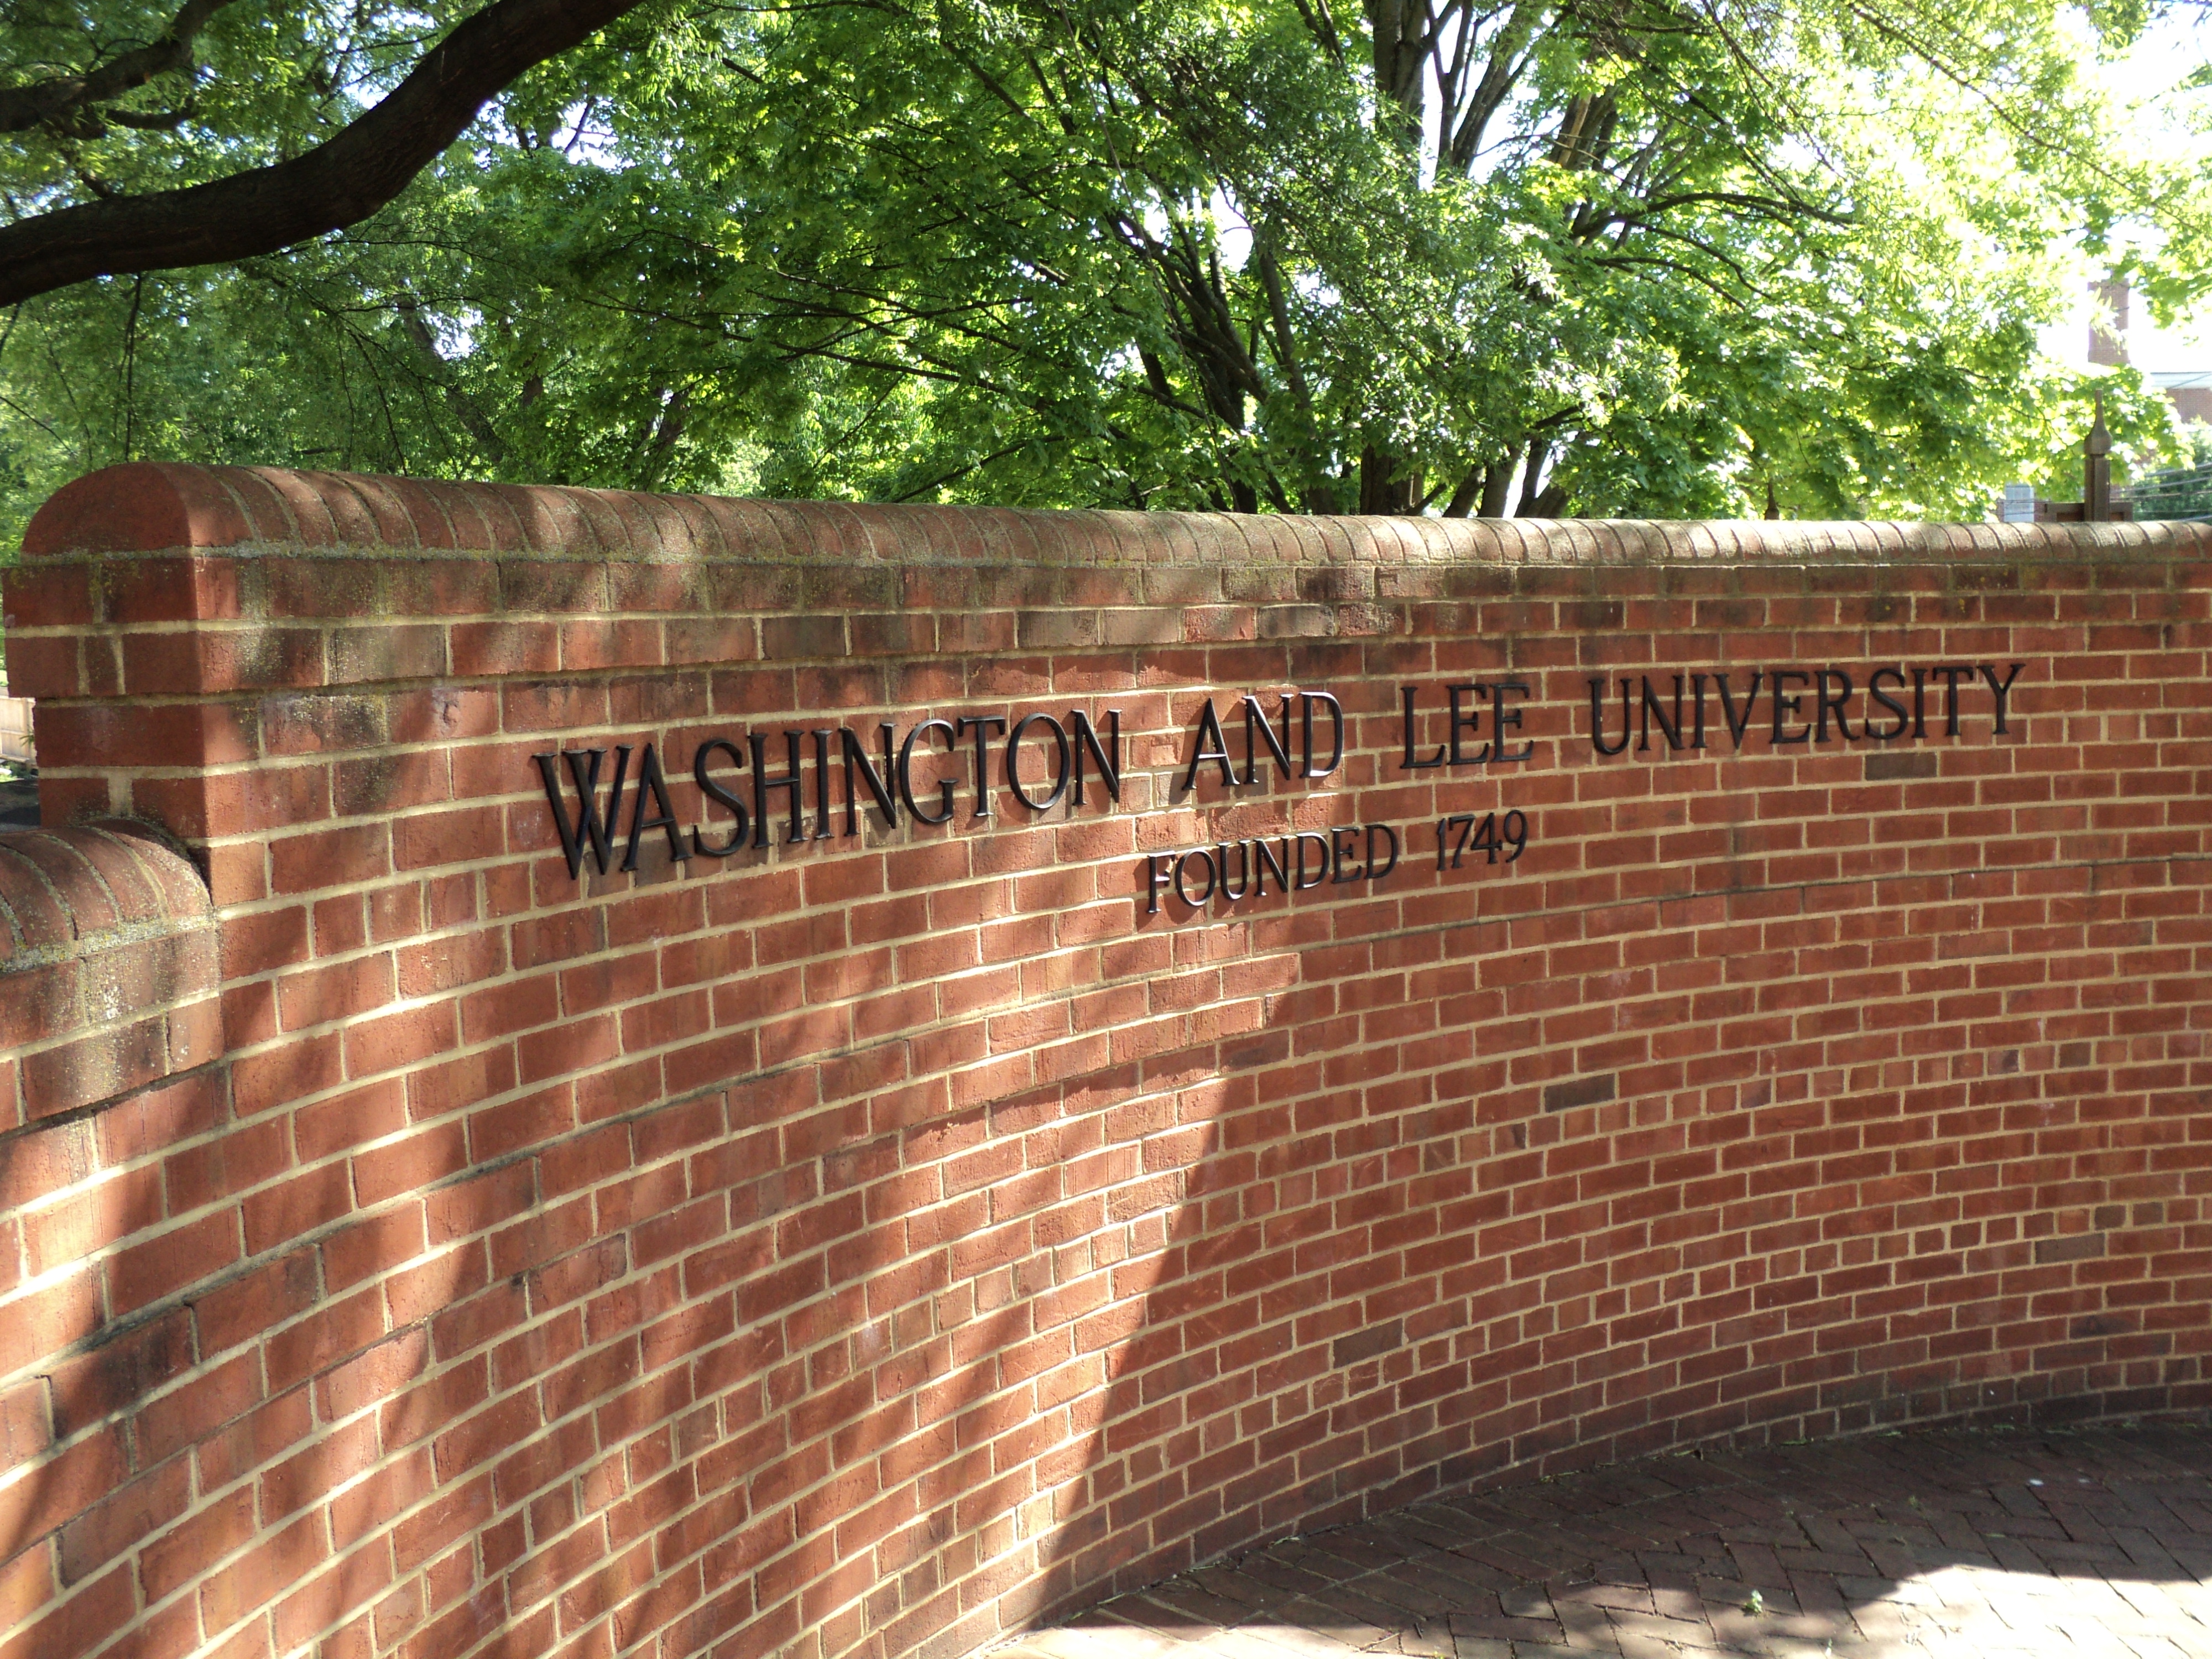 Brick sign with Washington and Lee written on it 